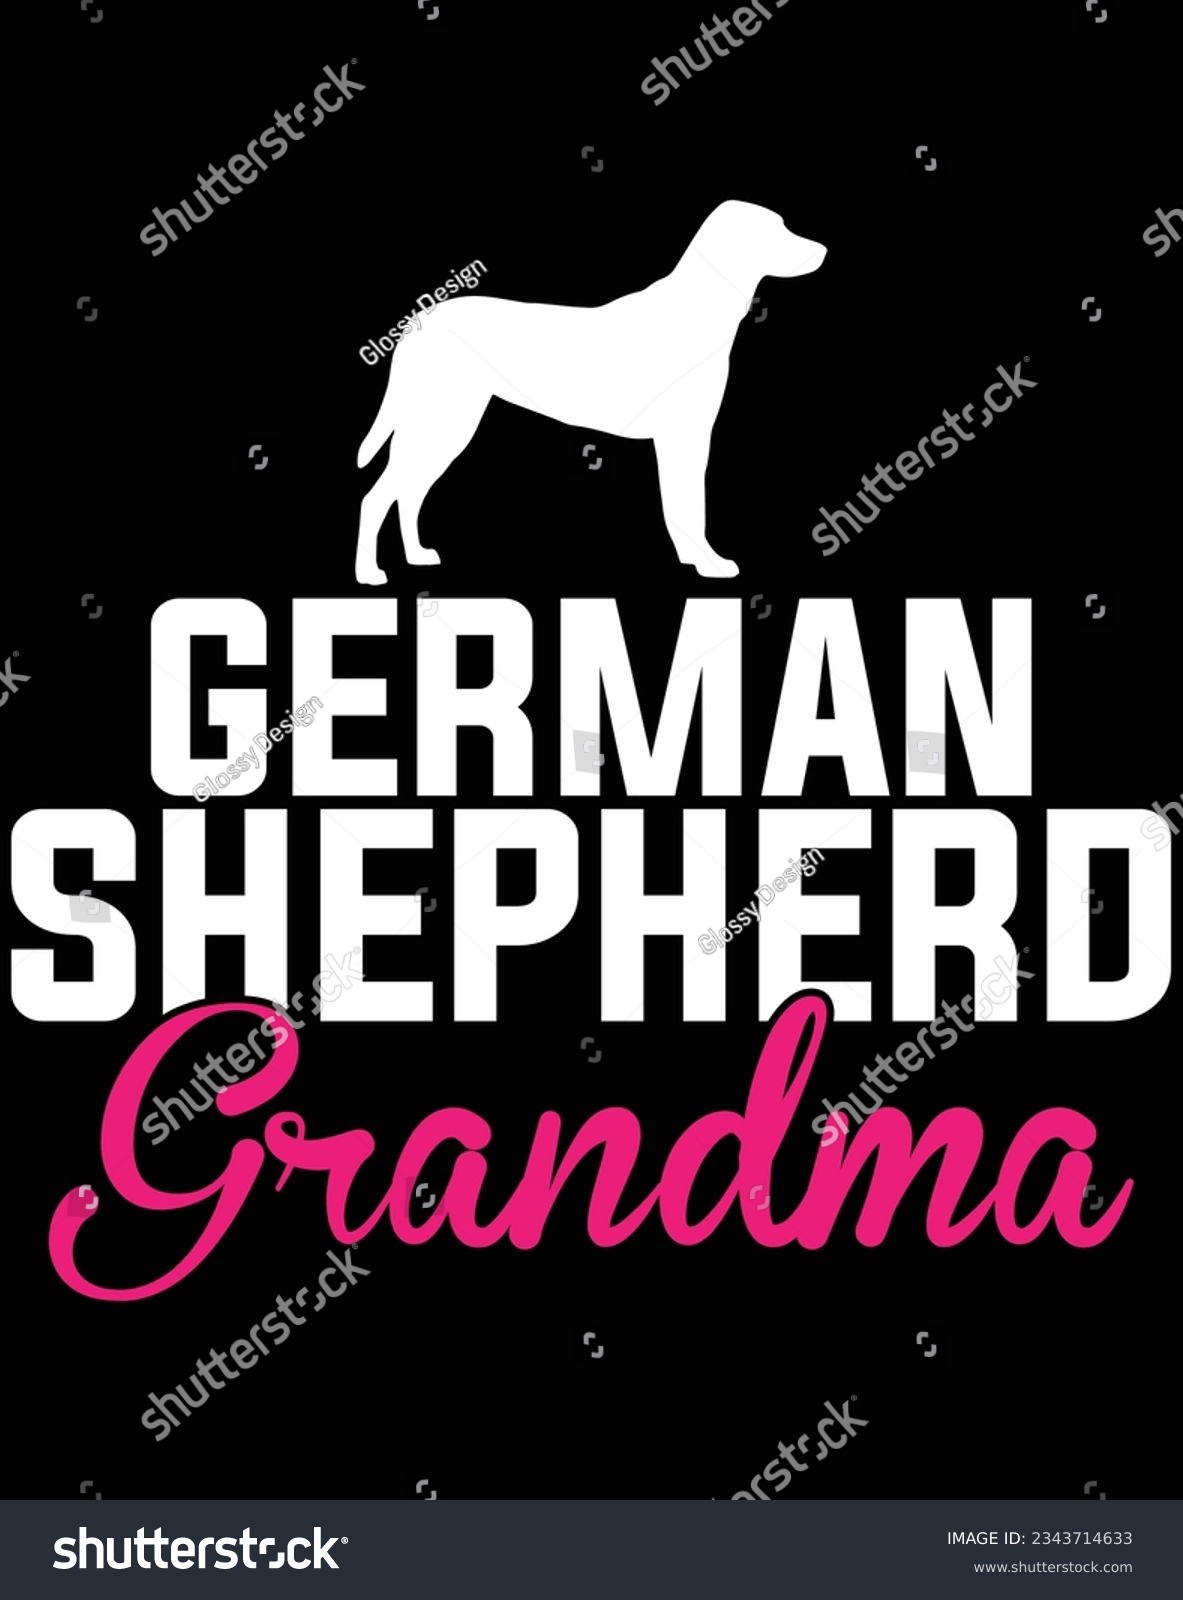 SVG of German shepherd grandma EPS file for cutting machine. You can edit and print this vector art with EPS editor. svg